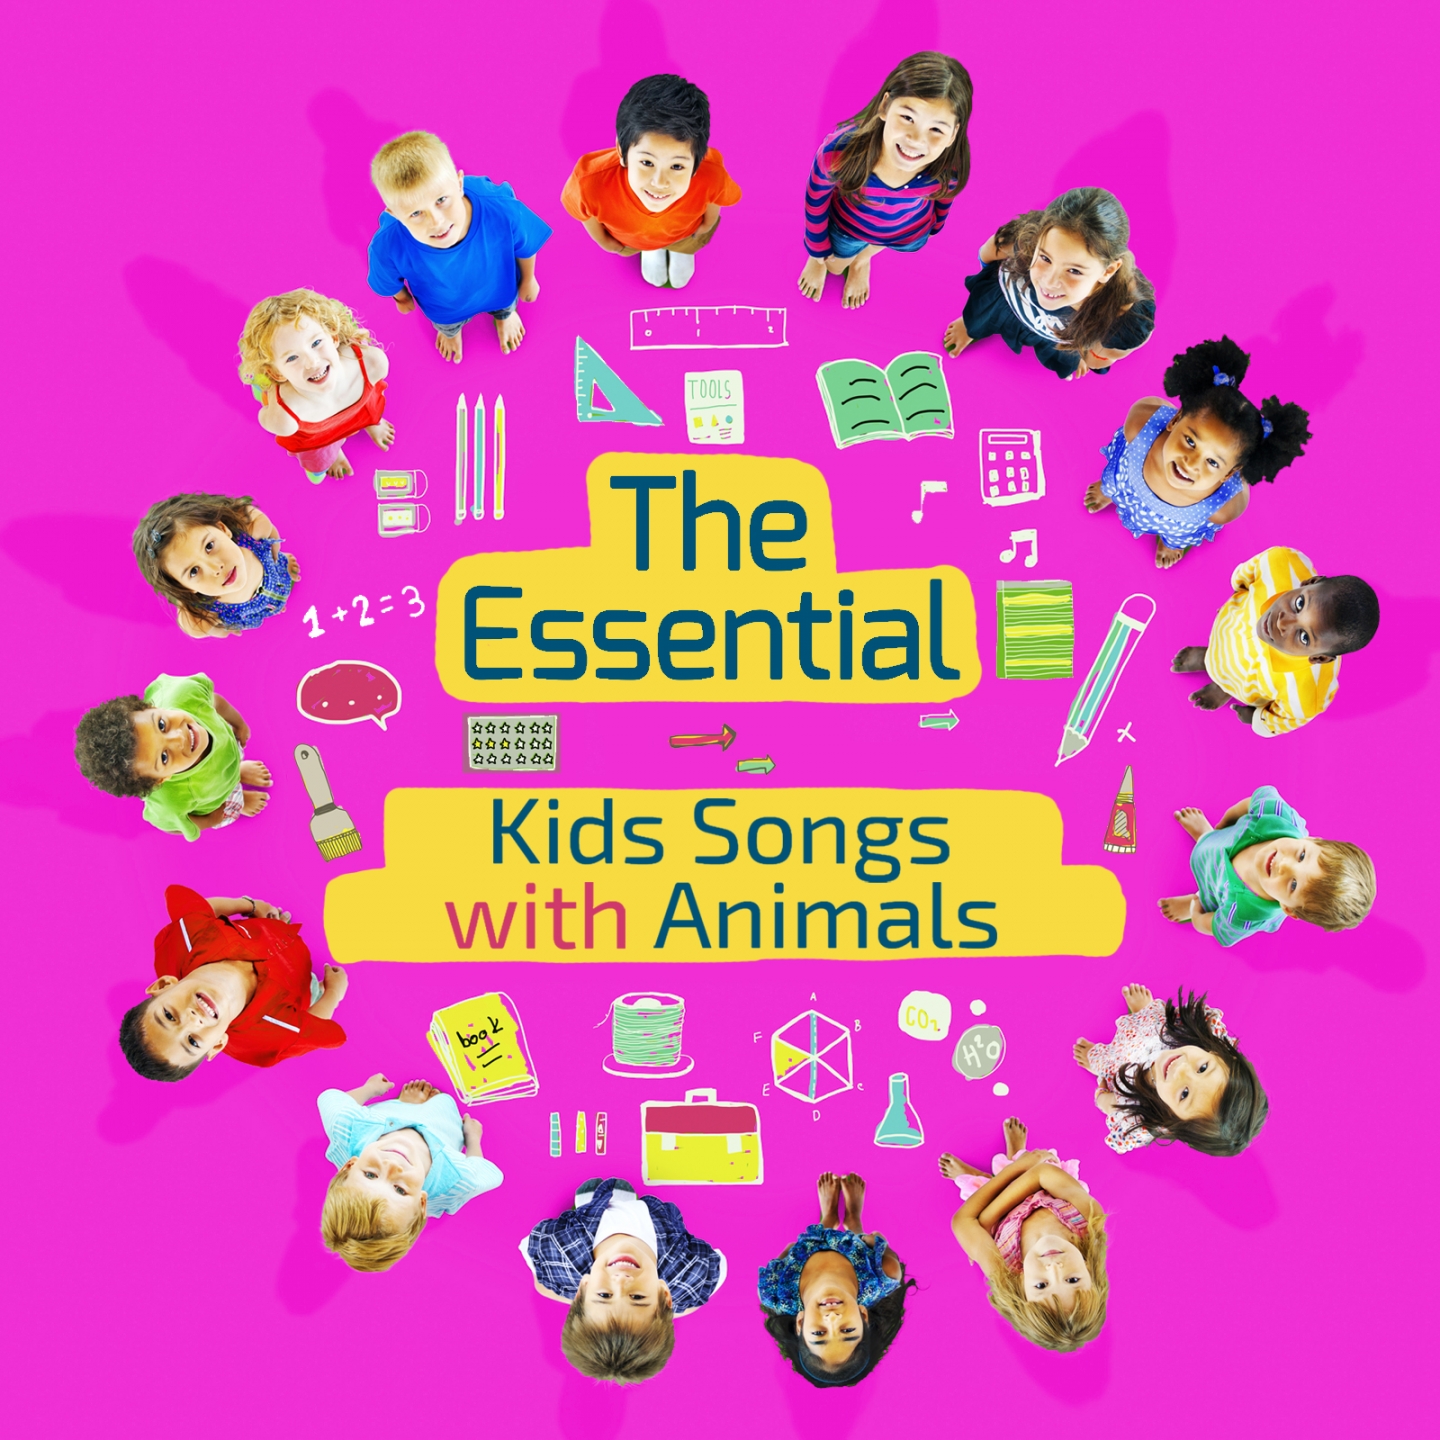 The Essential Kids Songs with Animals